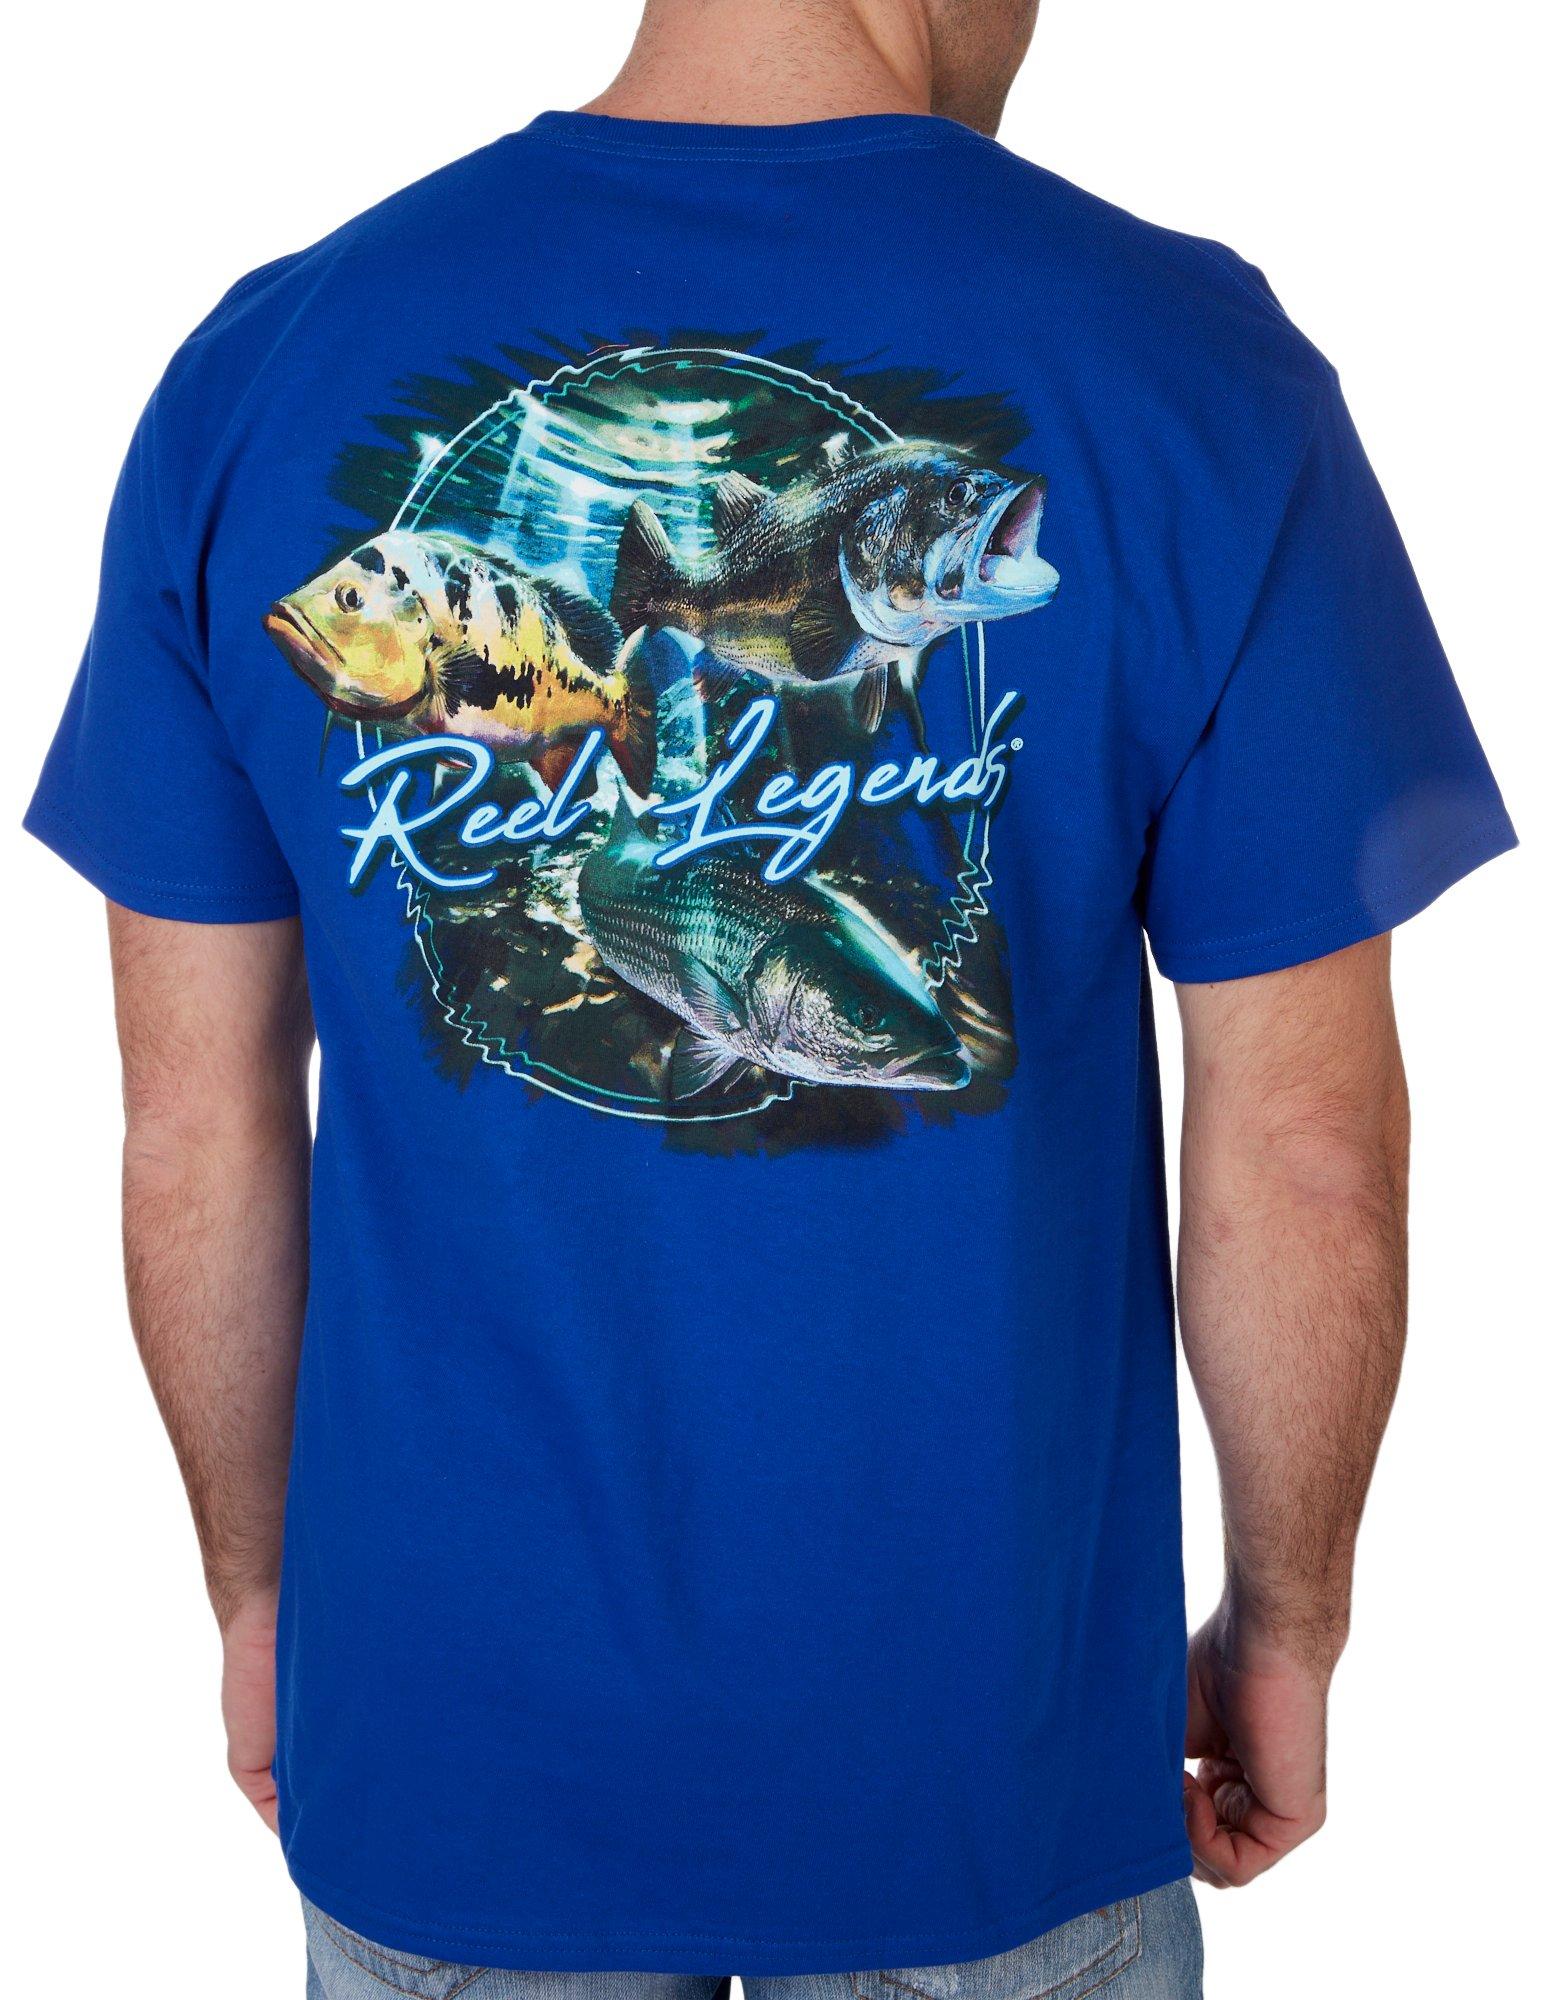 VINTAGE MEN'S T SHIRT XL REEL LEGENDS BASS FISHING PERFORMANCE CLOTHIN -  clothing & accessories - by owner - apparel